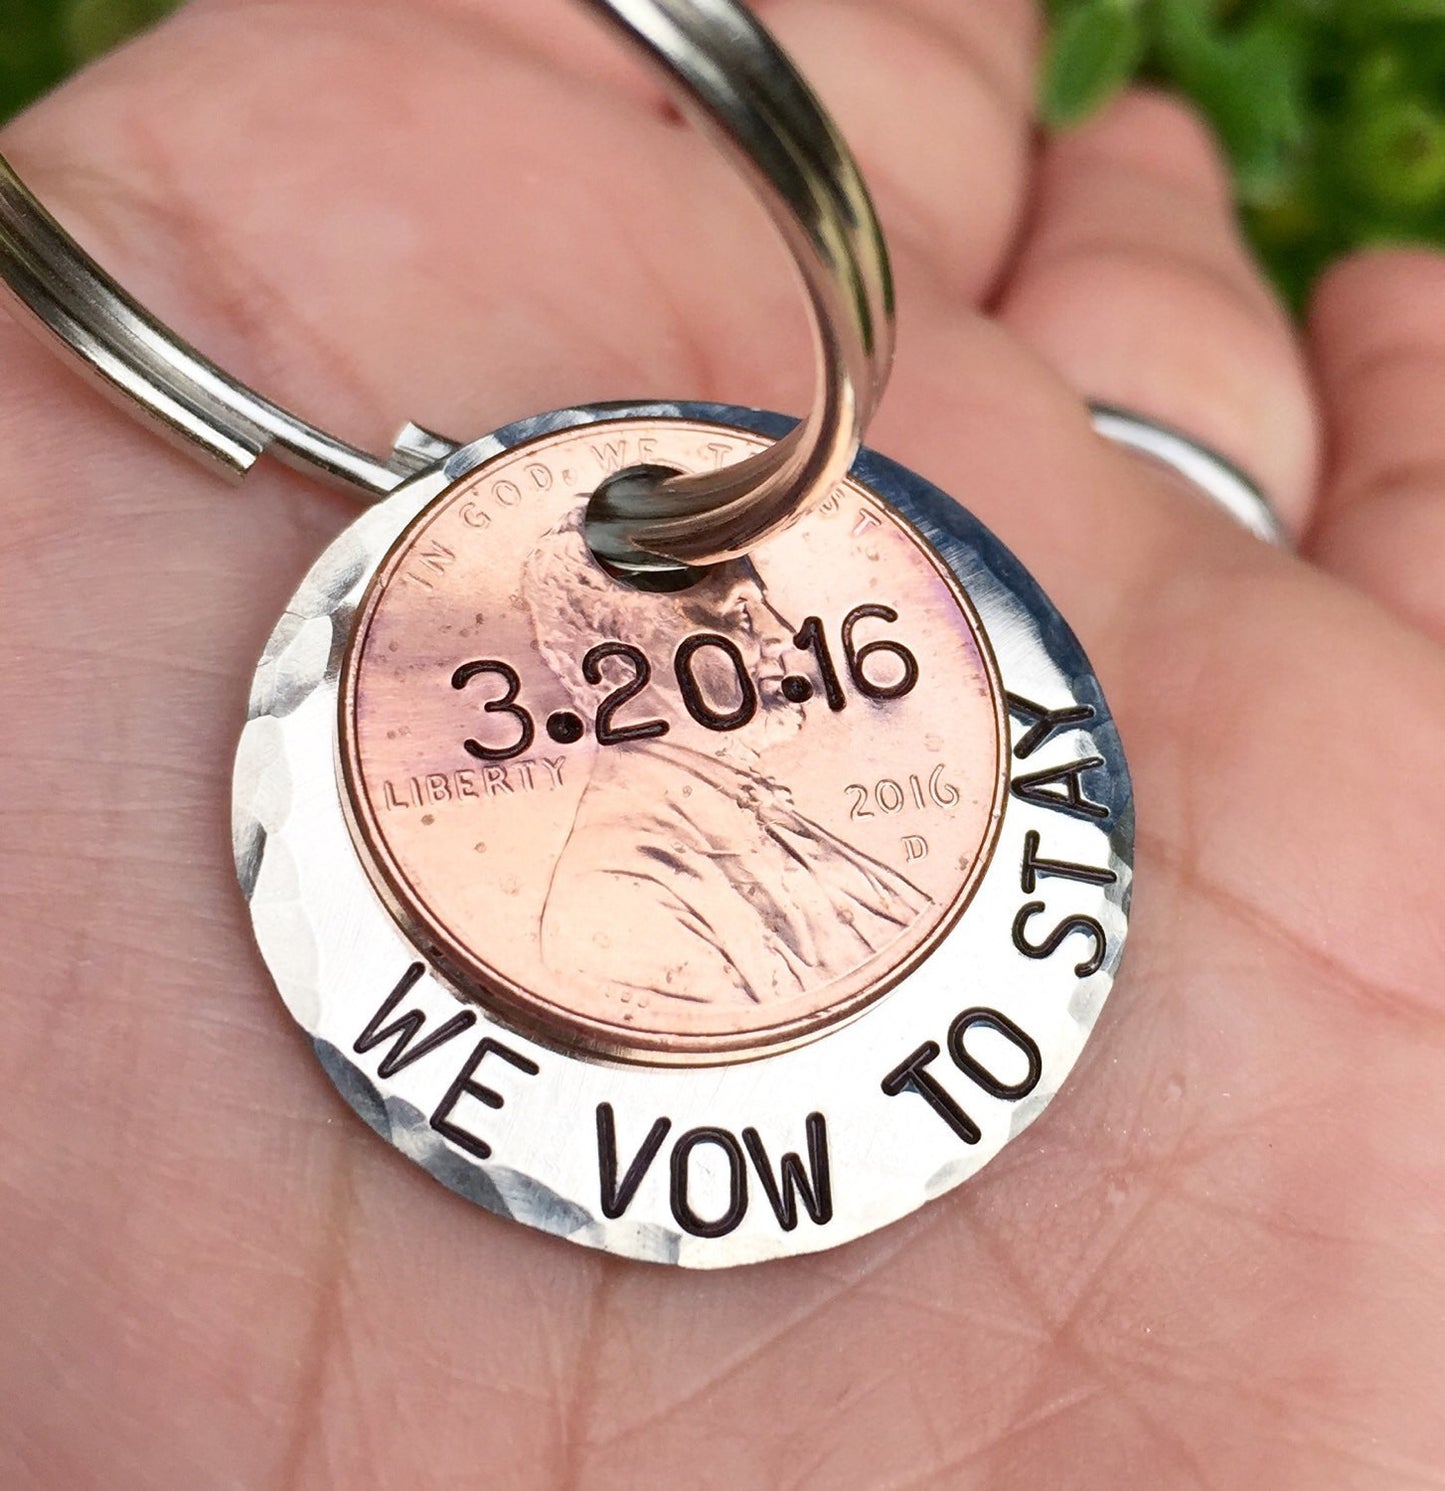 Personalized Penny Keychain, We Vow To Stay - Natashaaloha, jewelry, bracelets, necklace, keychains, fishing lures, gifts for men, charms, personalized, 